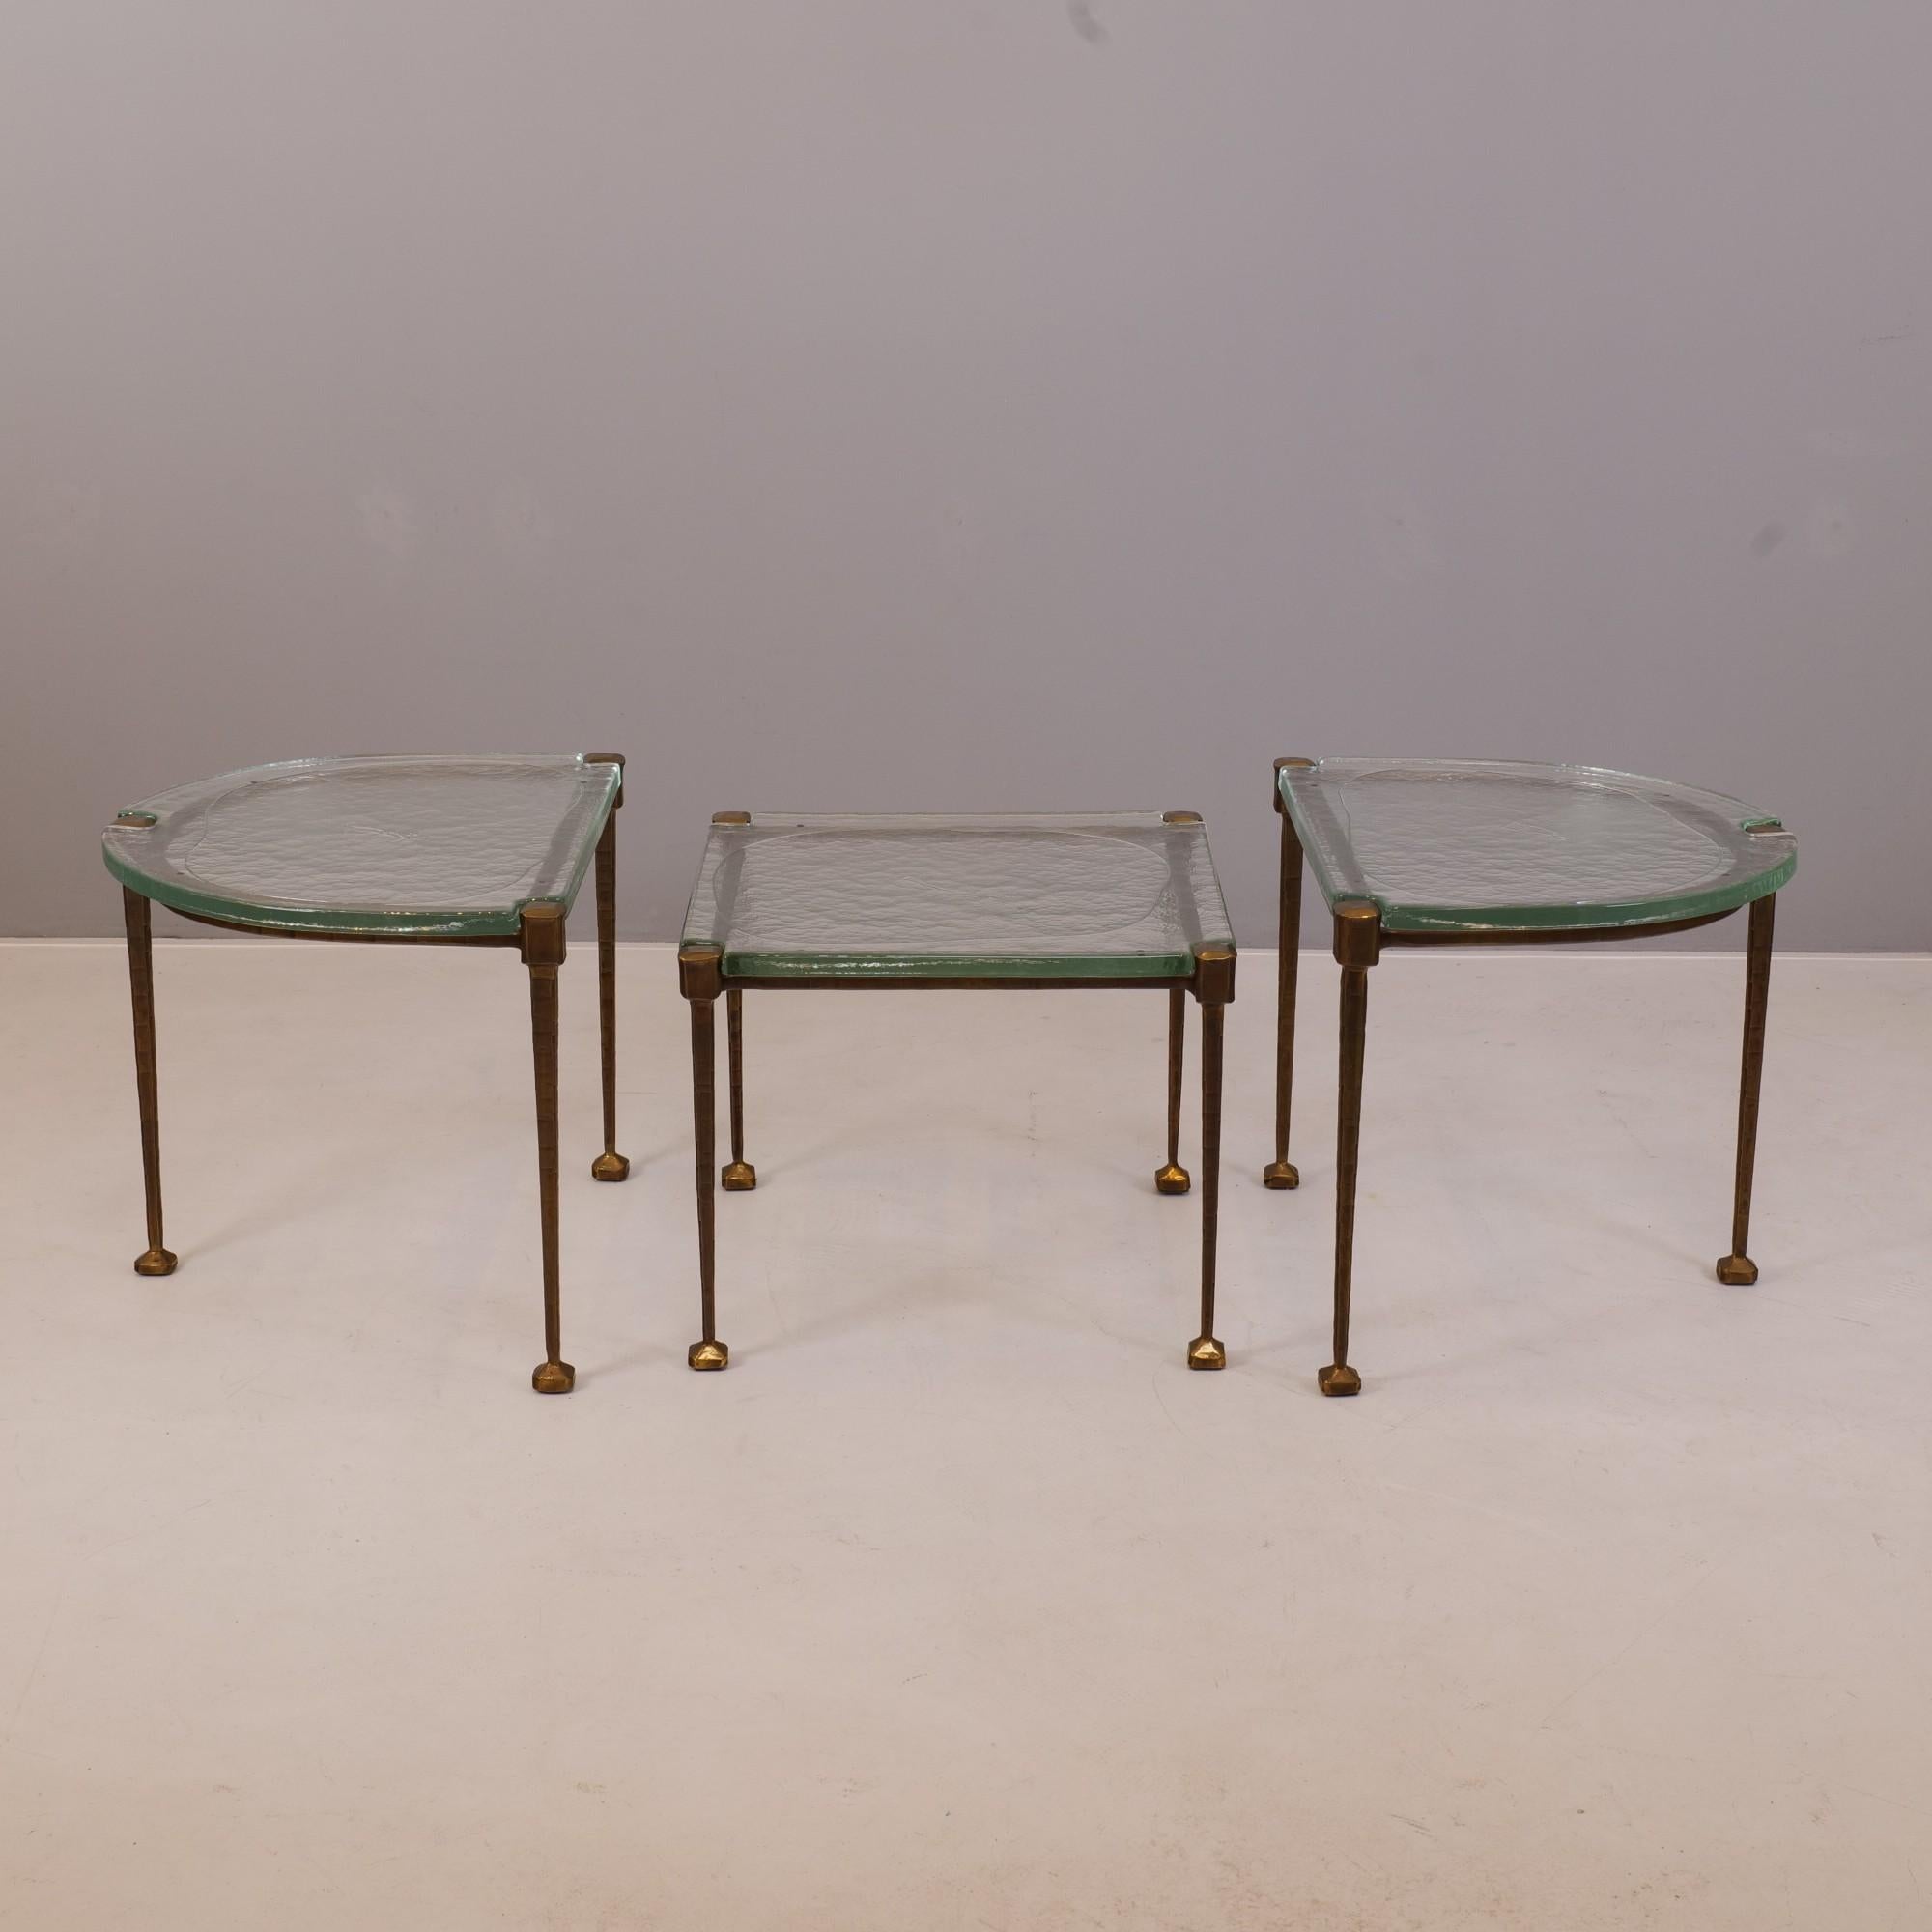 A set of three tables in forged bronze and molten glass. During the melting process of the glass was designed. 

two large tables:
width: 55 cm
depth: 69 cm
heigh: 54 cm

smaller table:
59 cm x 59 cm
heigh: 48 cm